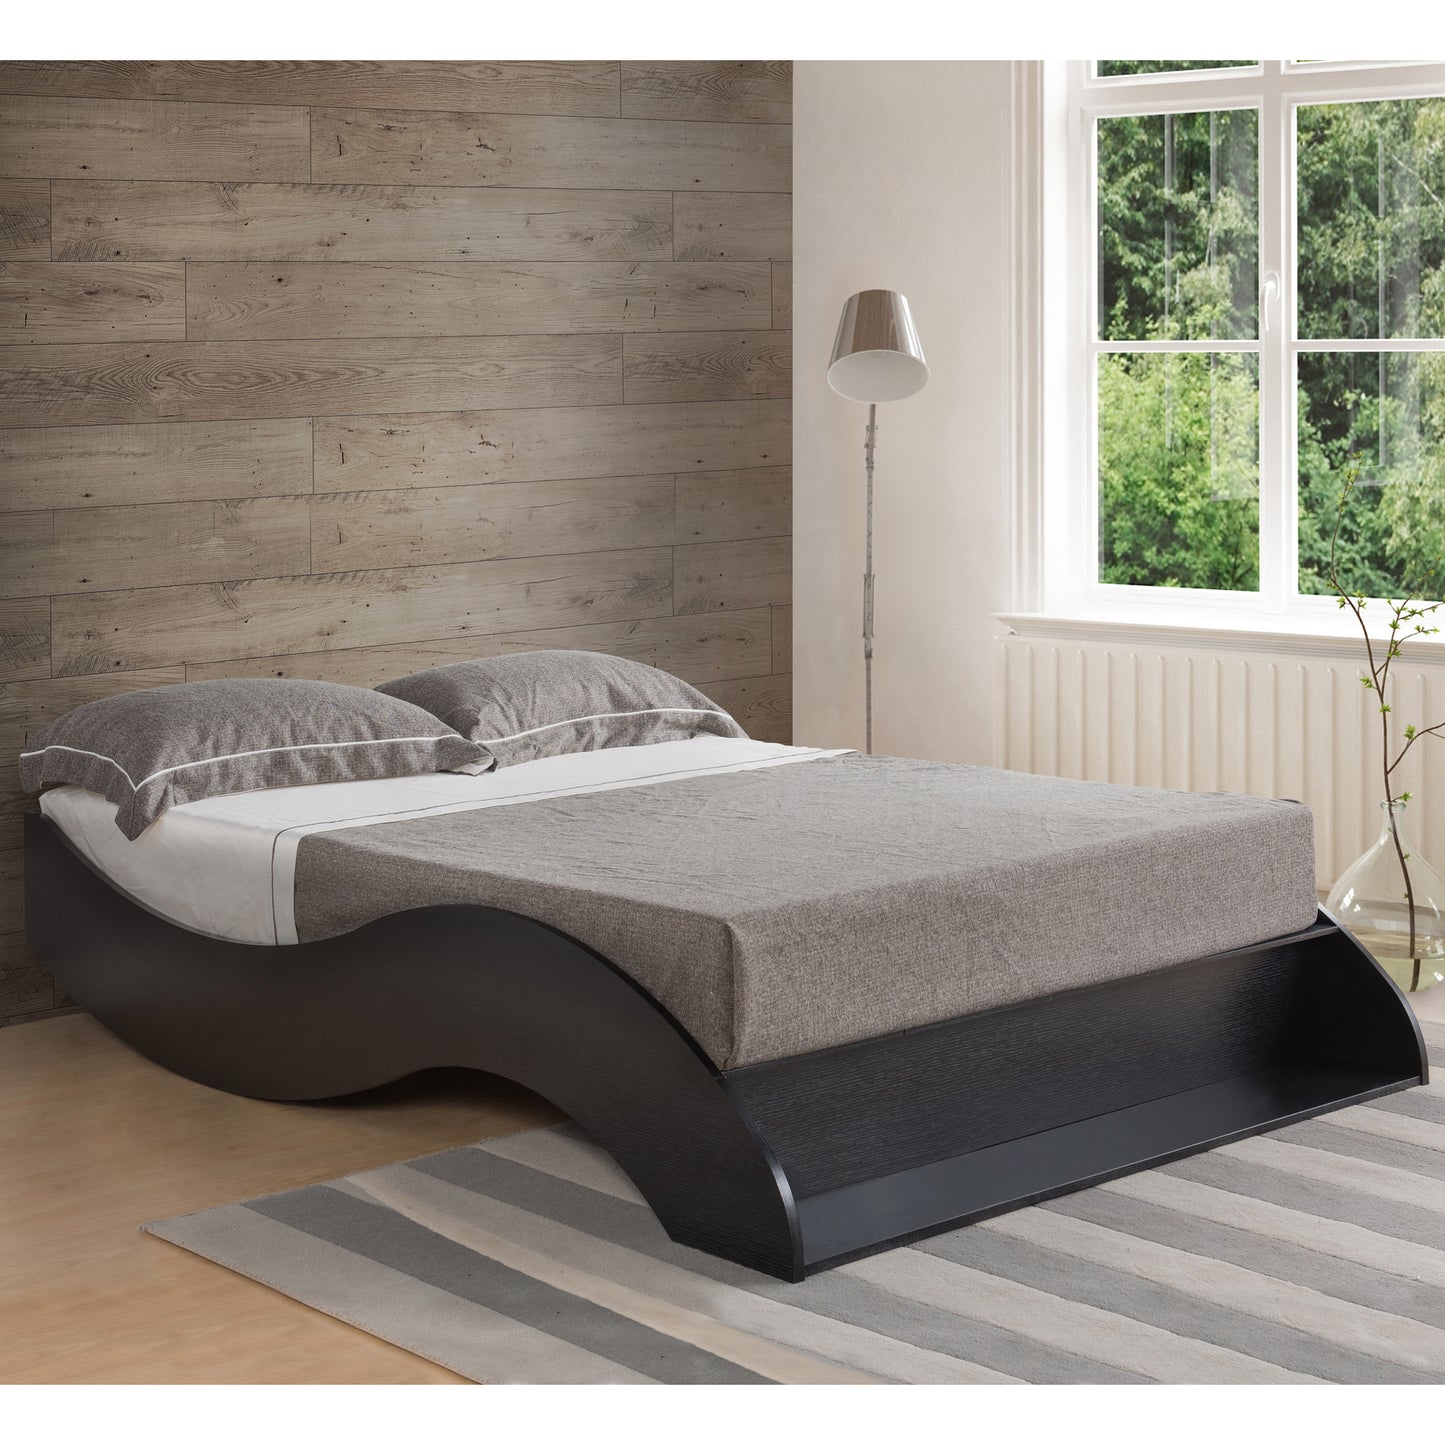 Right angled contemporary cappuccino curvy queen platform bed in a bedroom with accessories